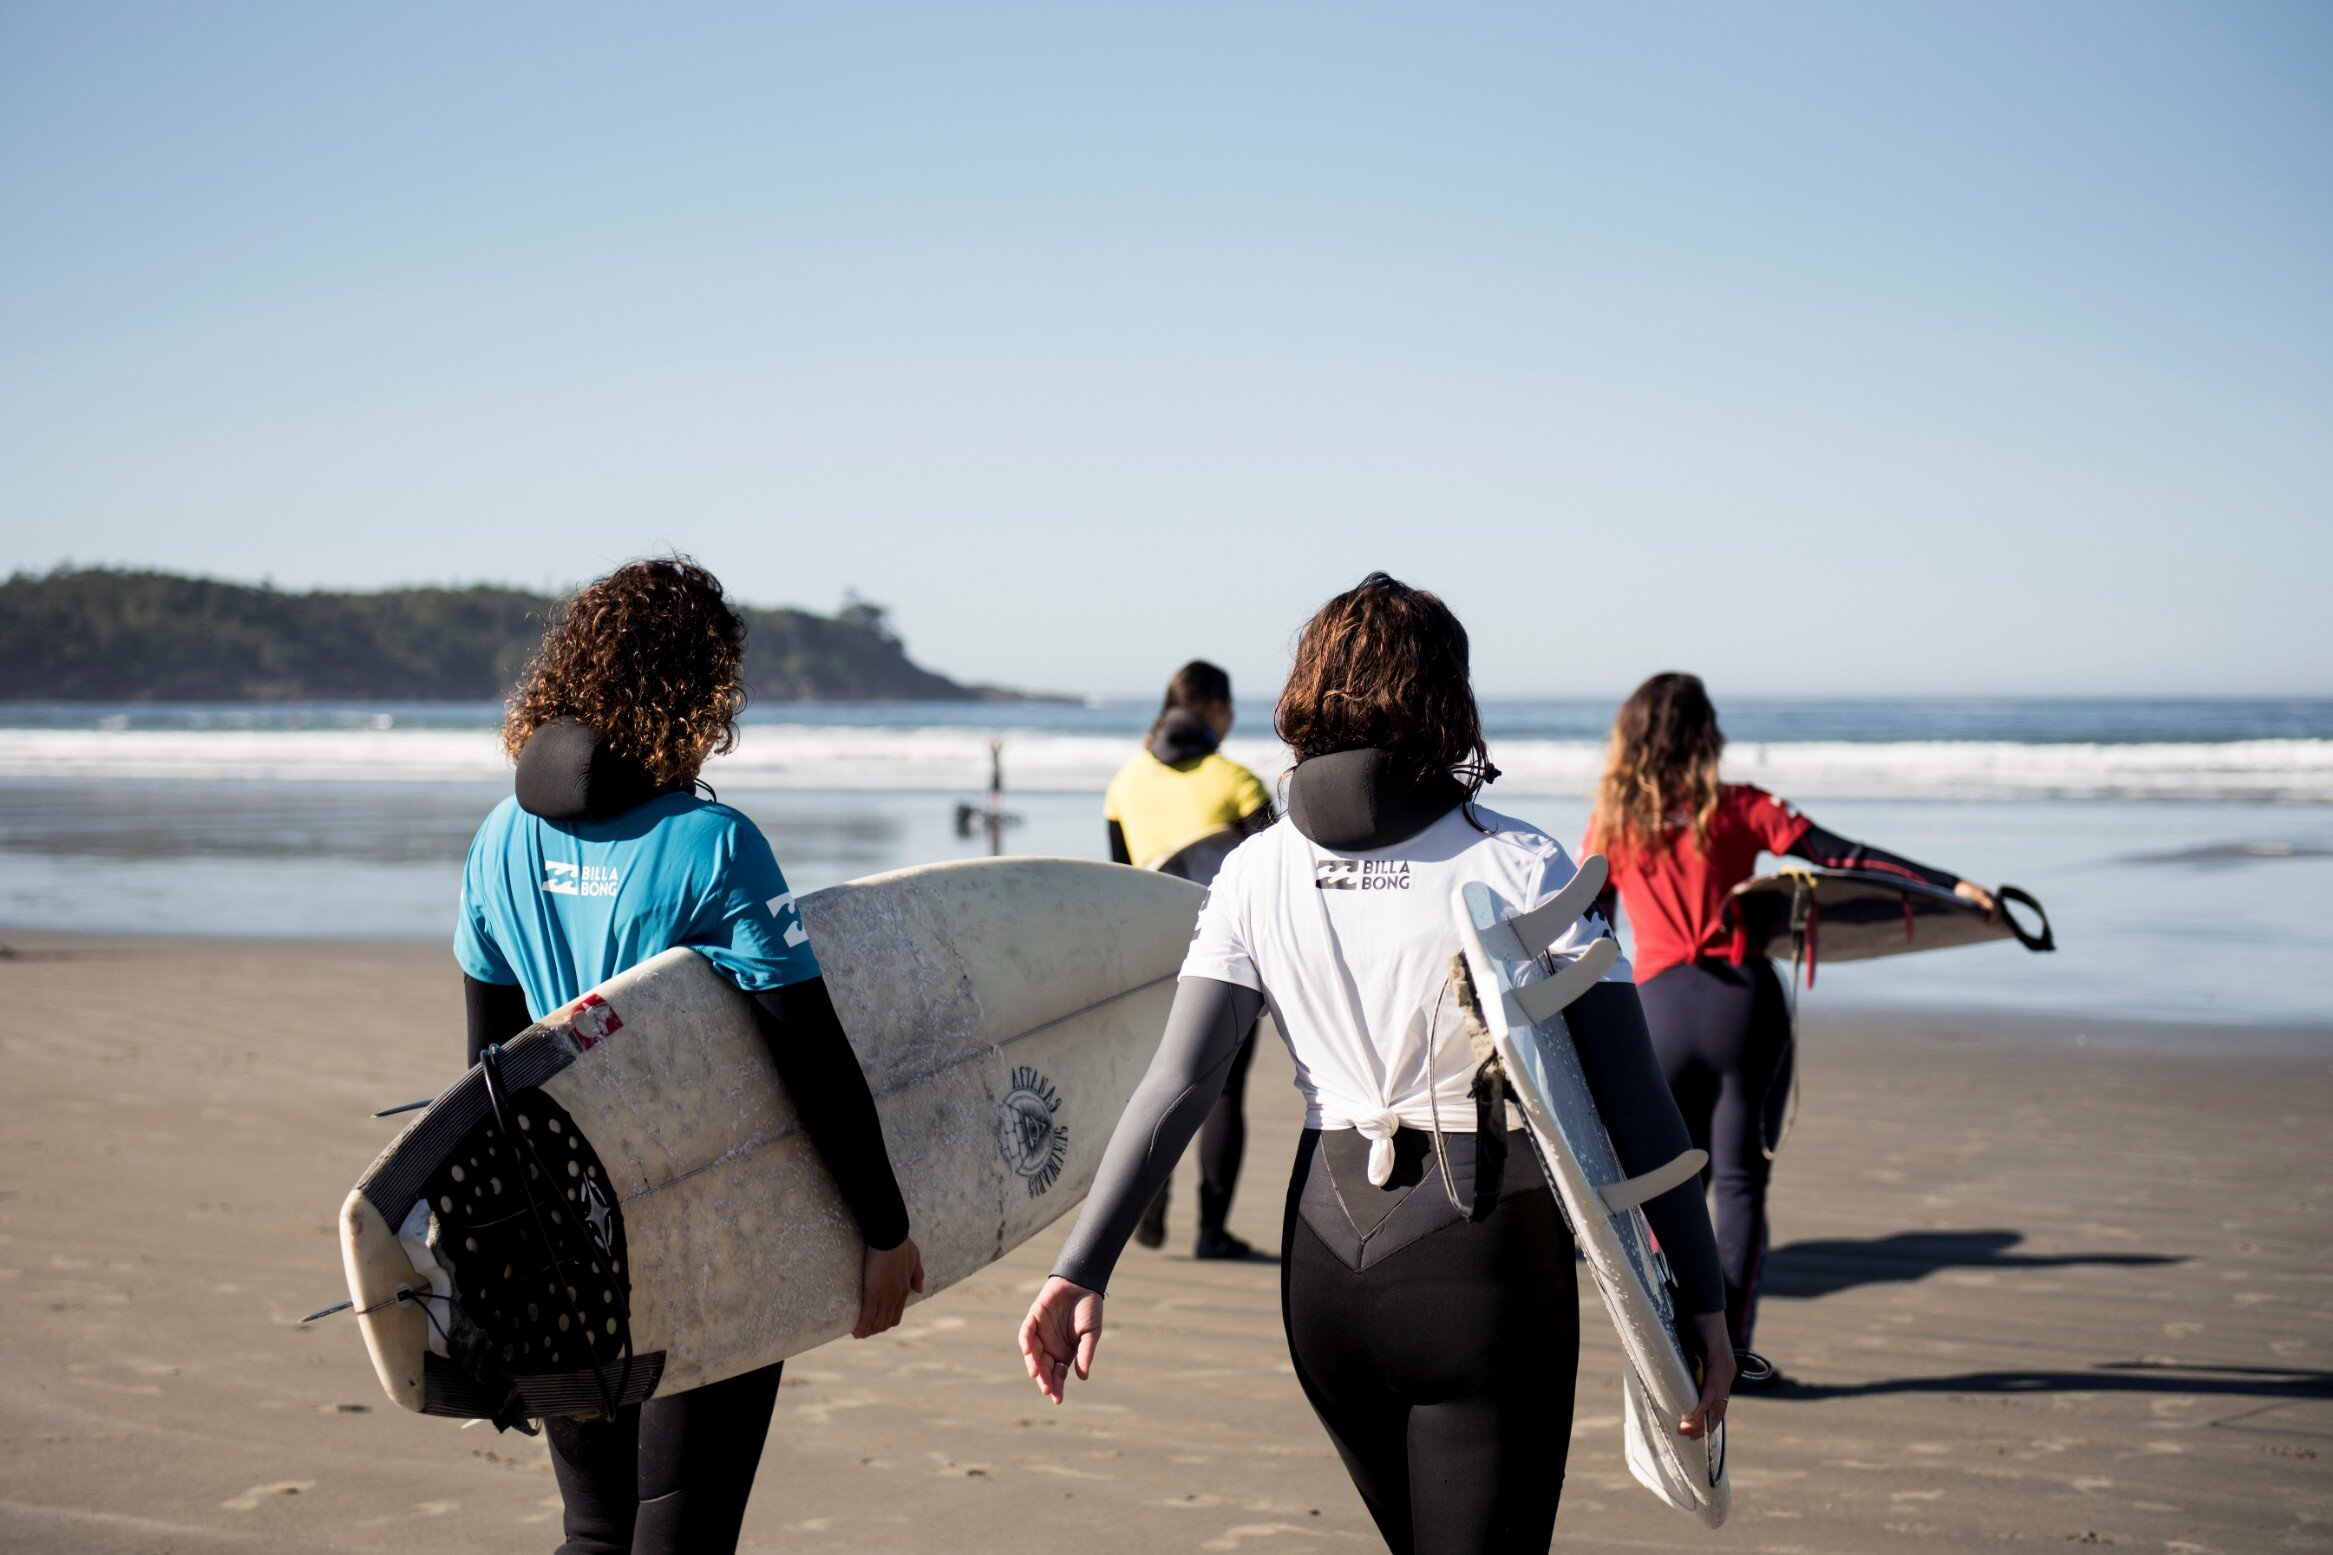 Four women surf competitors in differently coloured competition jerseys walking with their boards towards the ocean on Cox Bay.